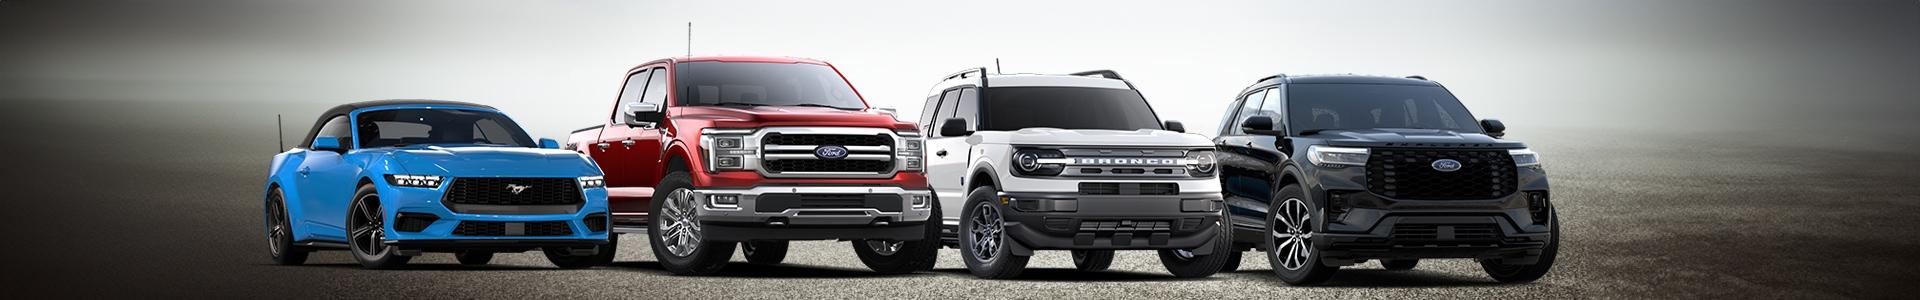 Ford Future Vehicles | Southern California Ford Dealers